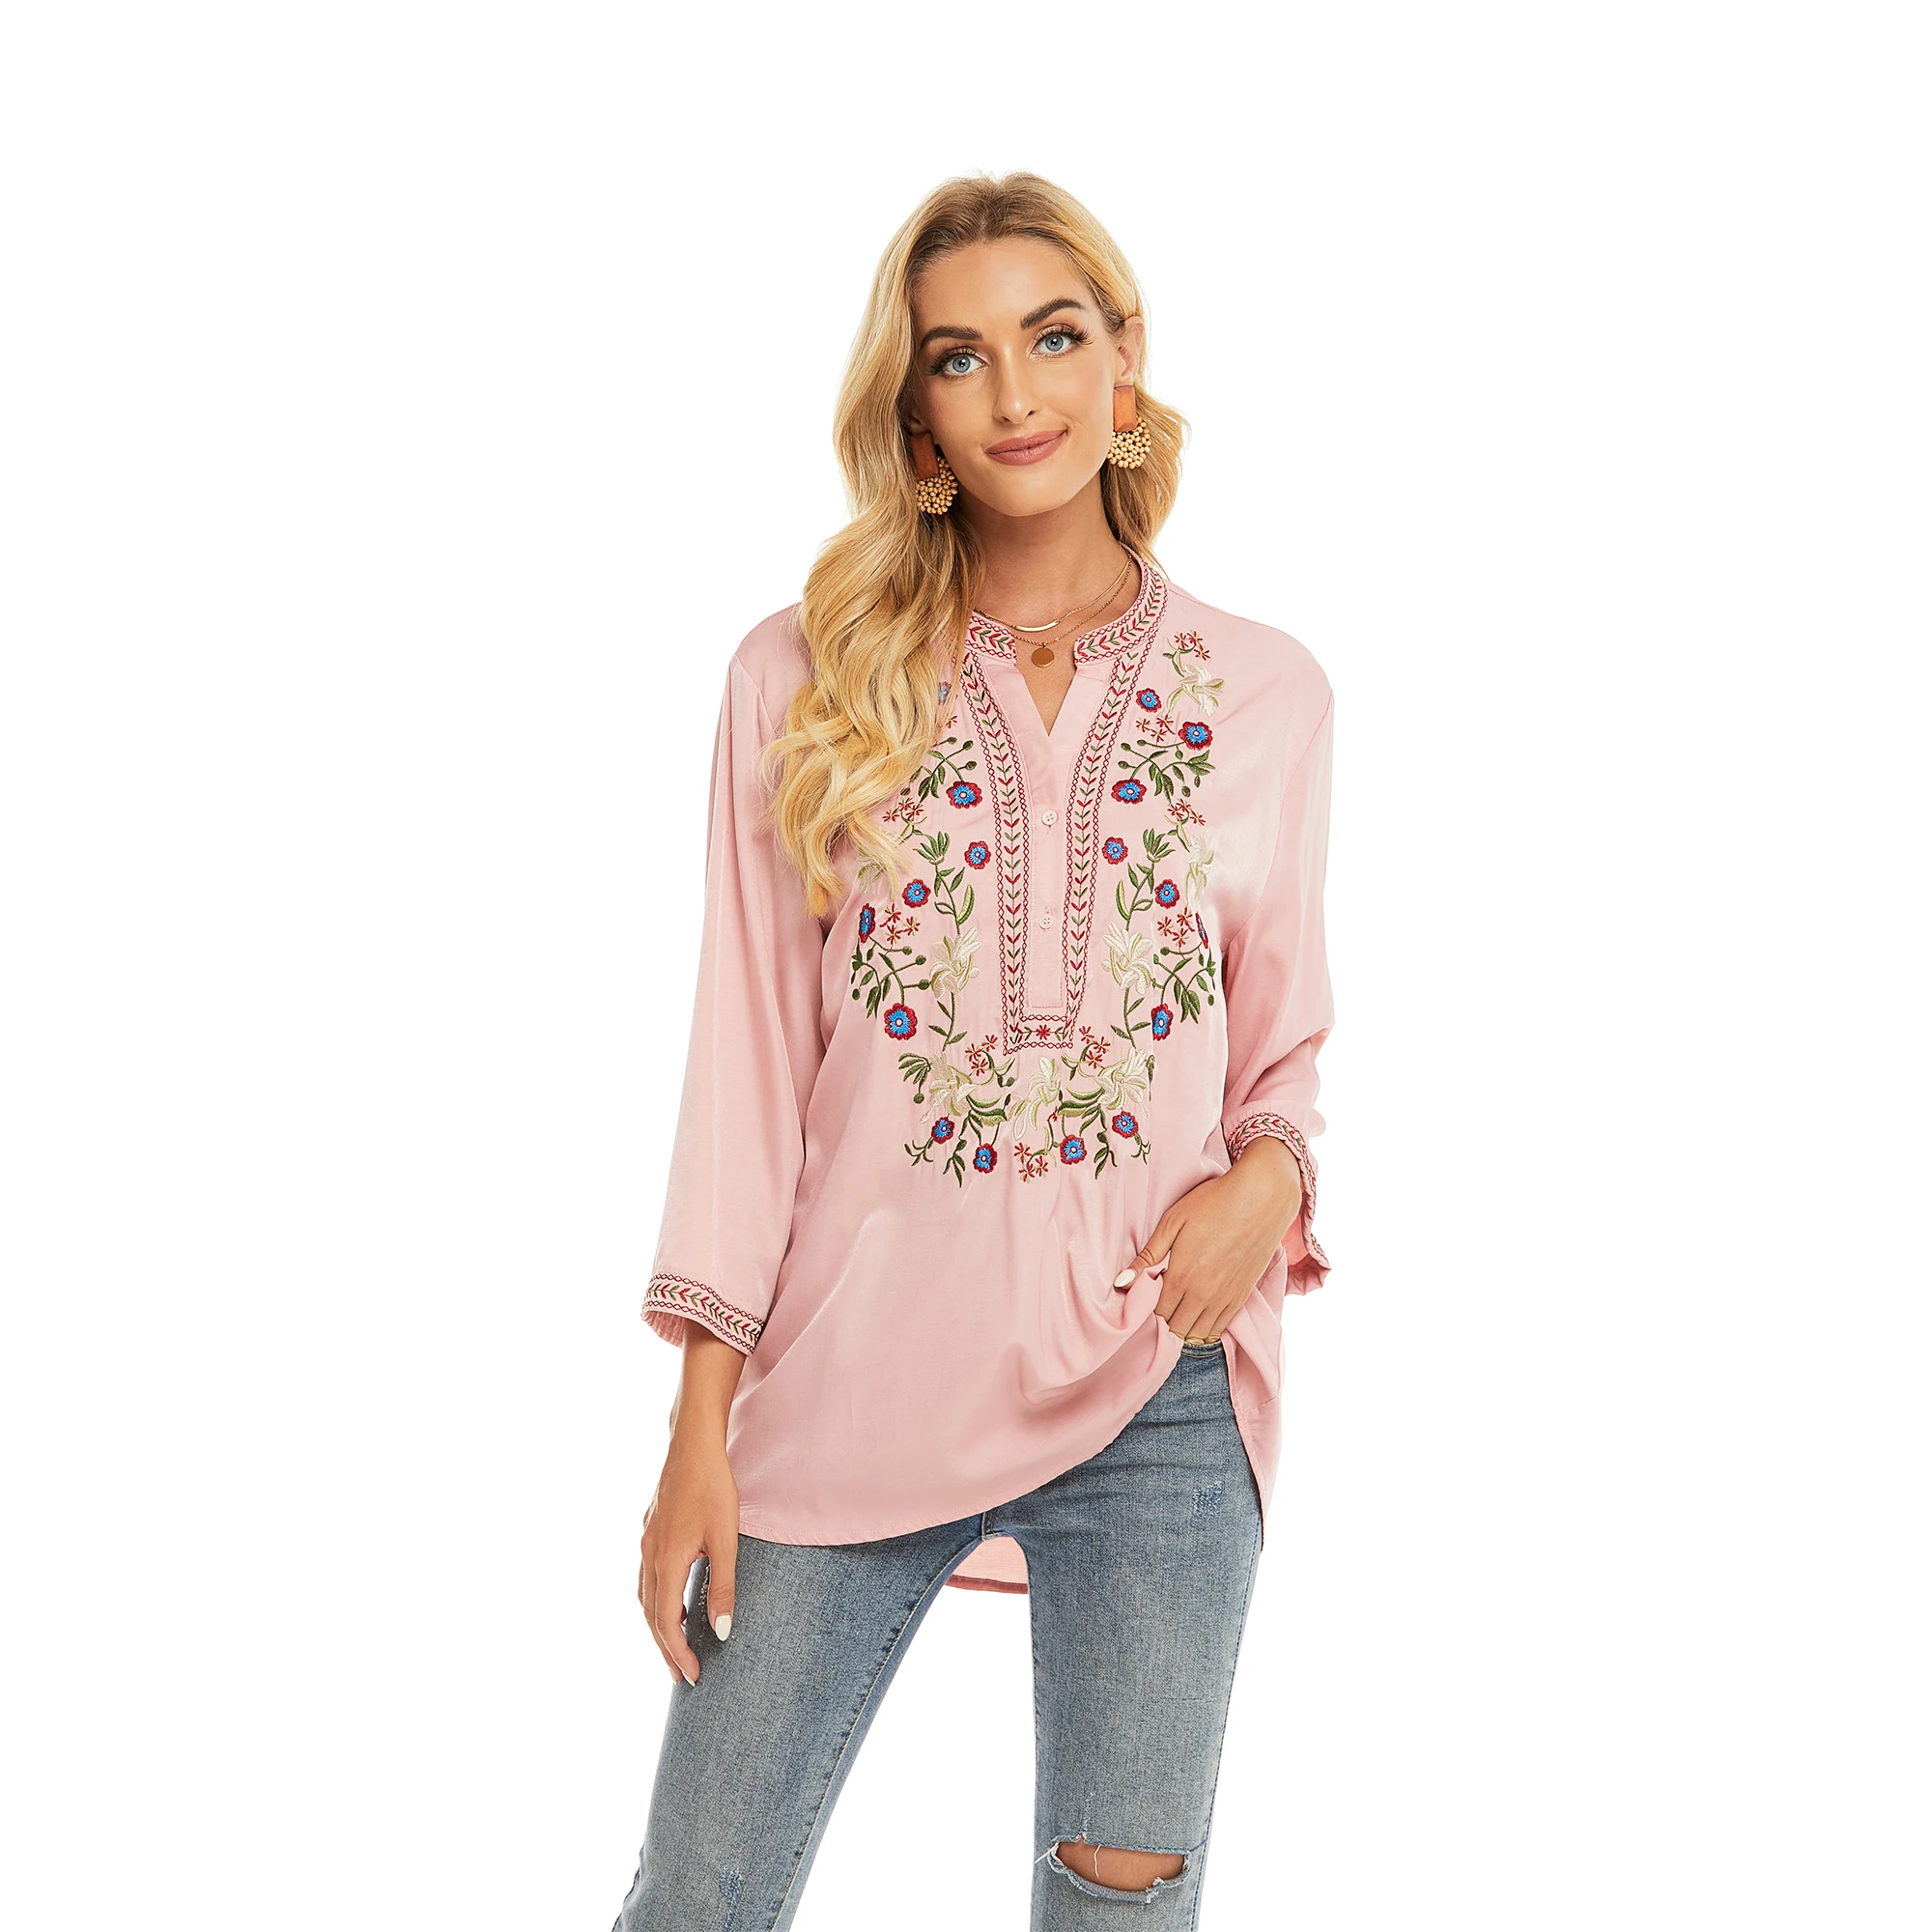 Eaeovni Ladies Loose Pullover Embroidered Shirts Plus Size Long Sleeve Tops Ladies Farmer Tops